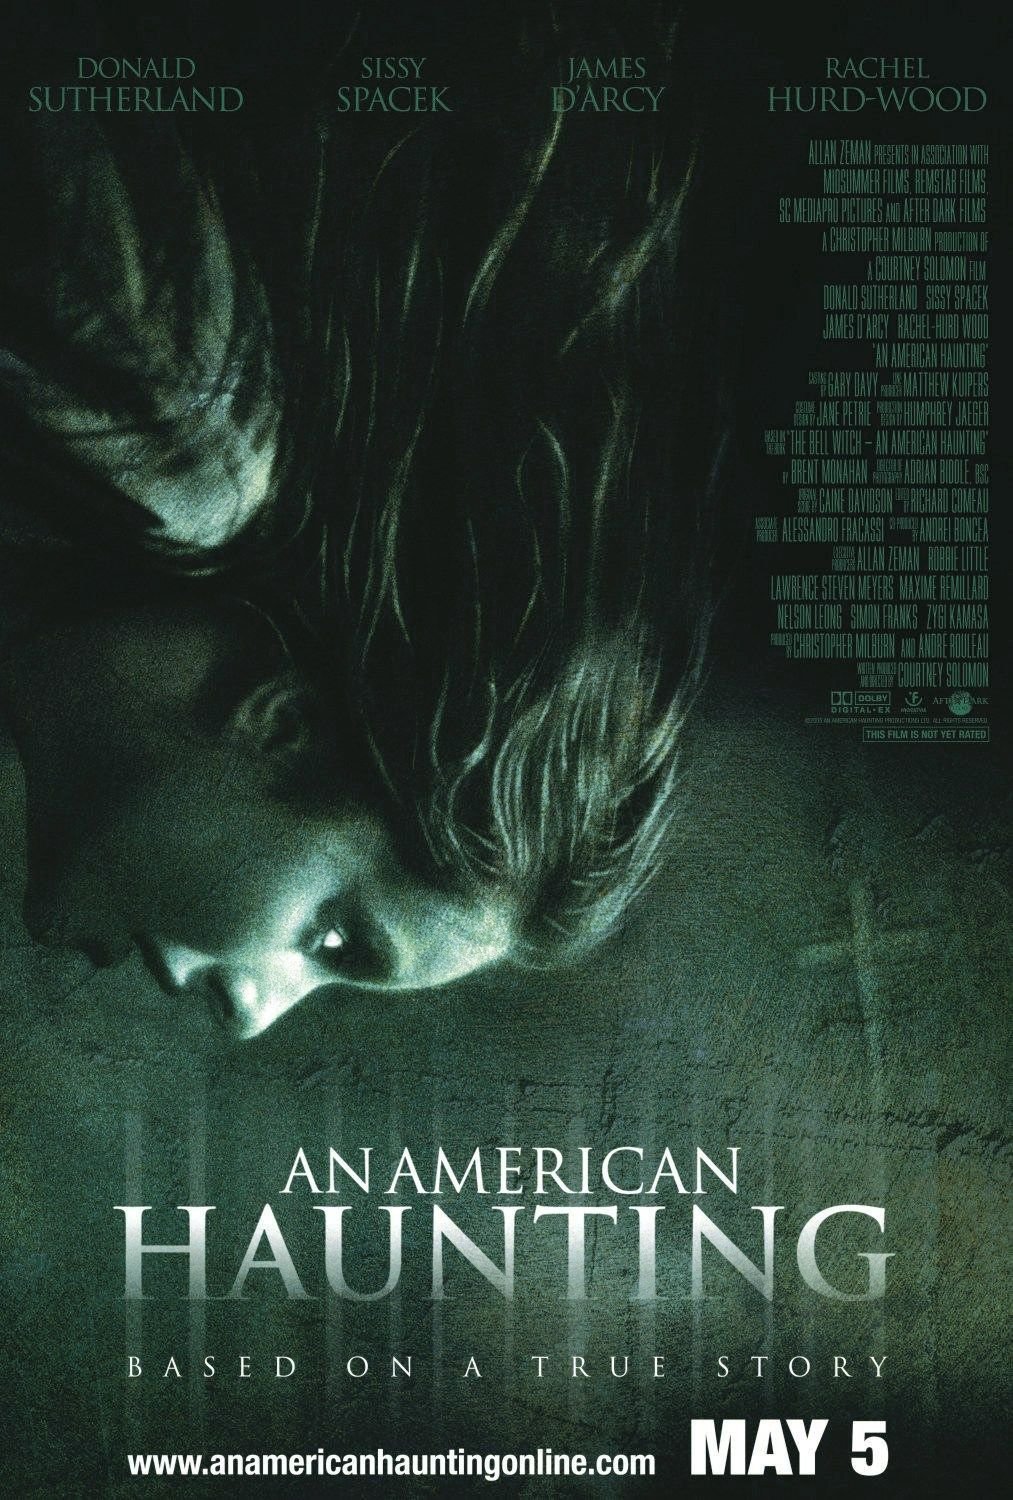 Poster of the movie An American Haunting